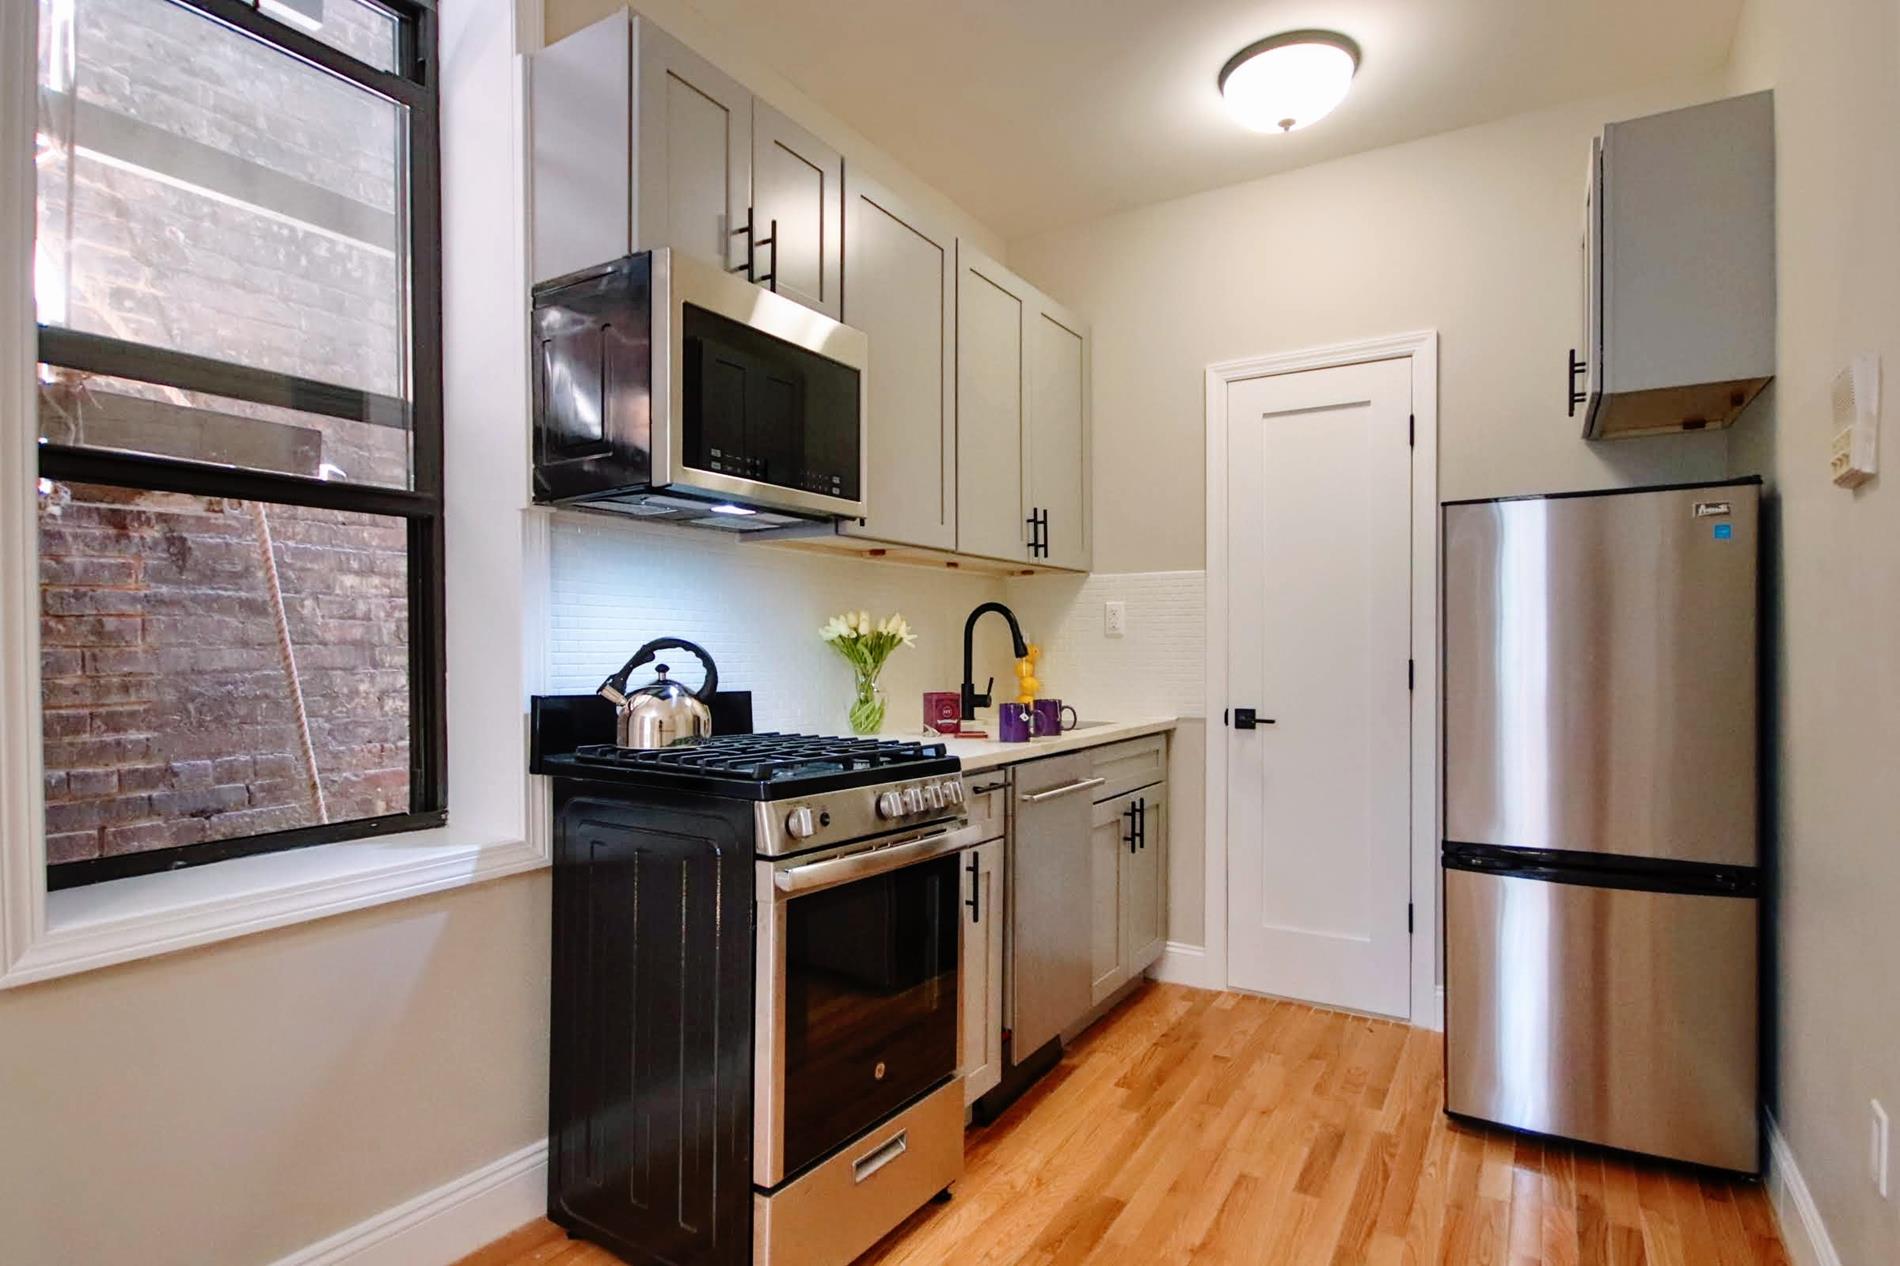 a kitchen with stainless steel appliances a refrigerator microwave and sink